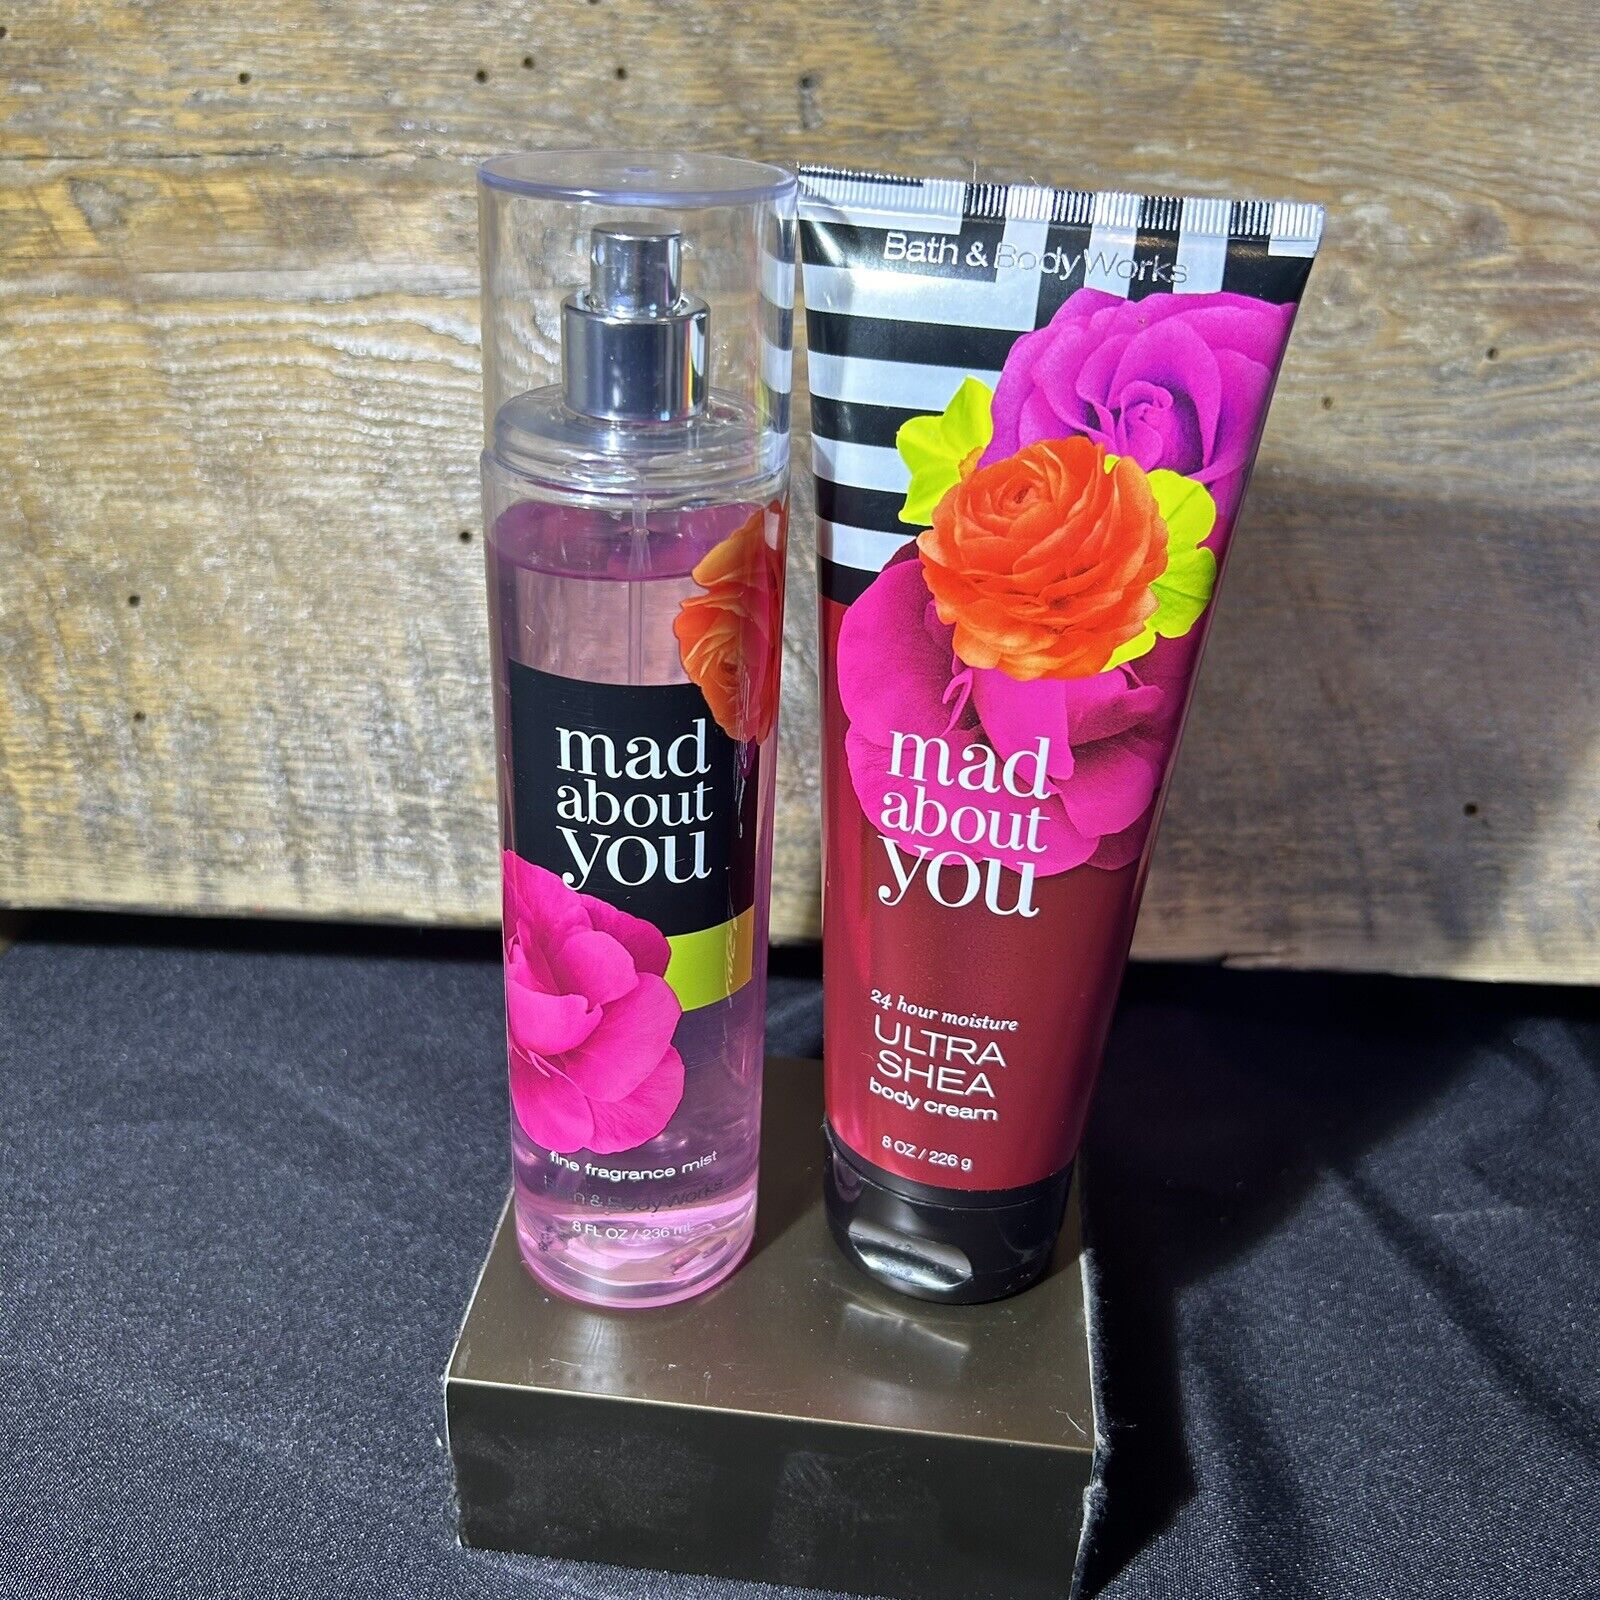 MAD ABOUT YOU  Bath & Body Works Cream and Fragrance Mist   